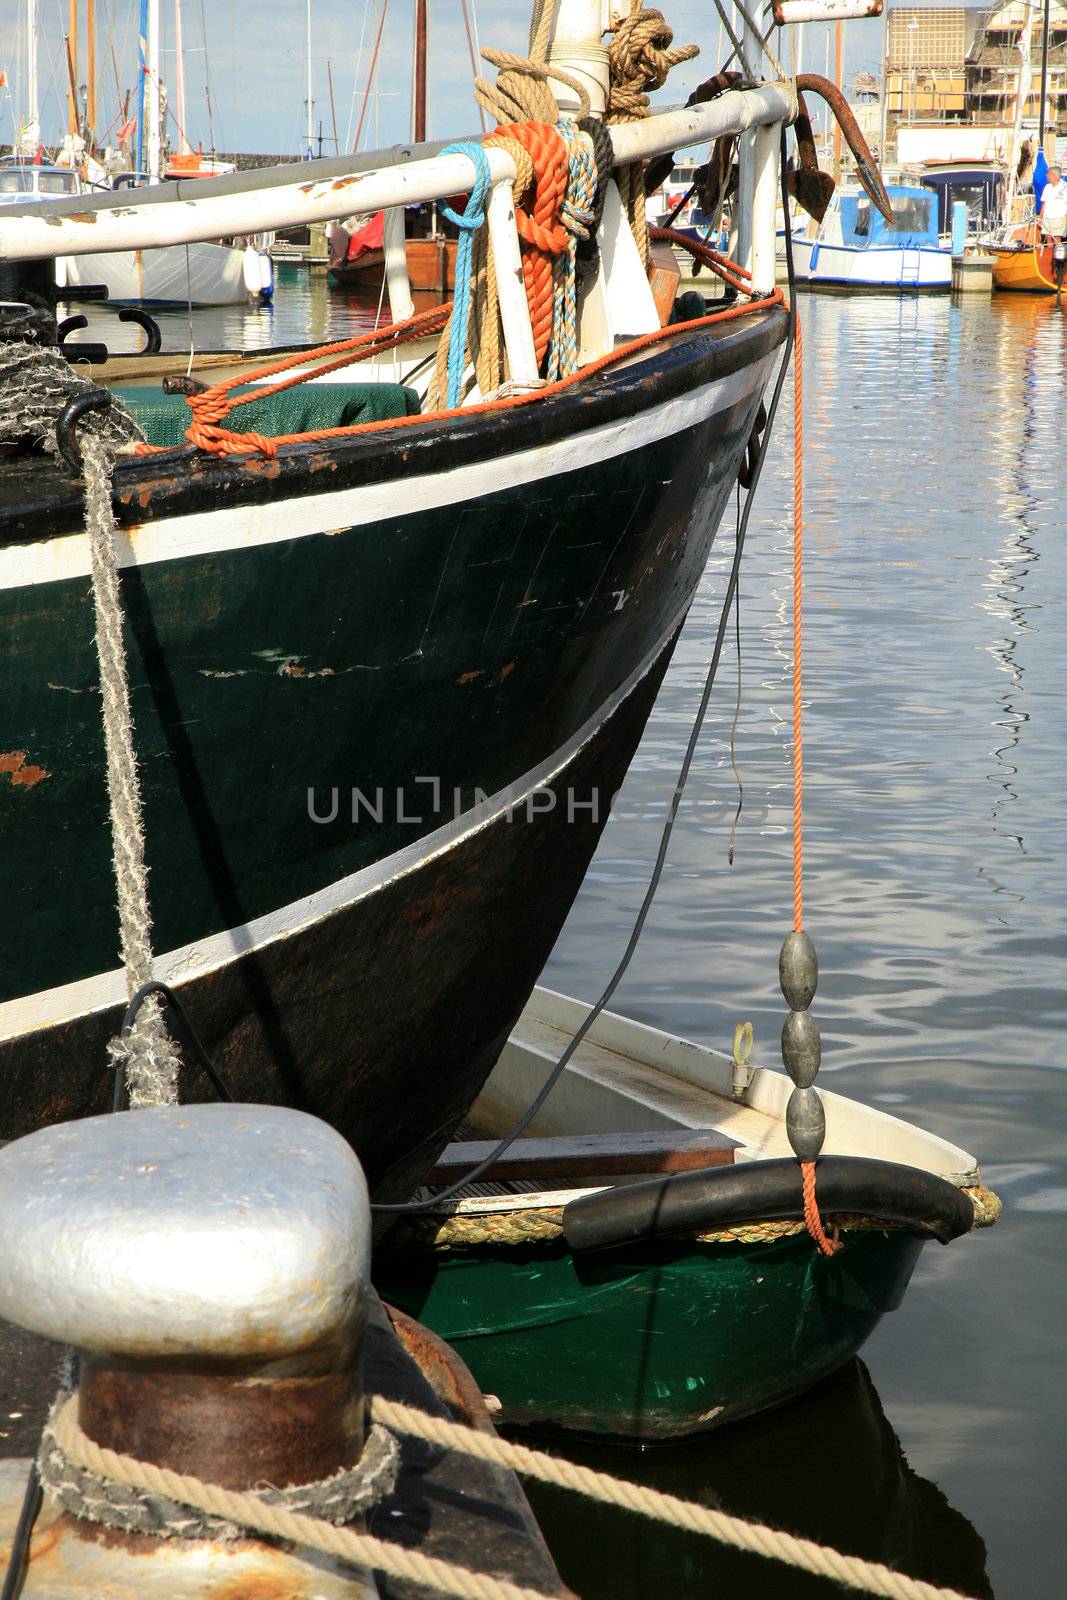 Small and big boats - contrast by fotokate